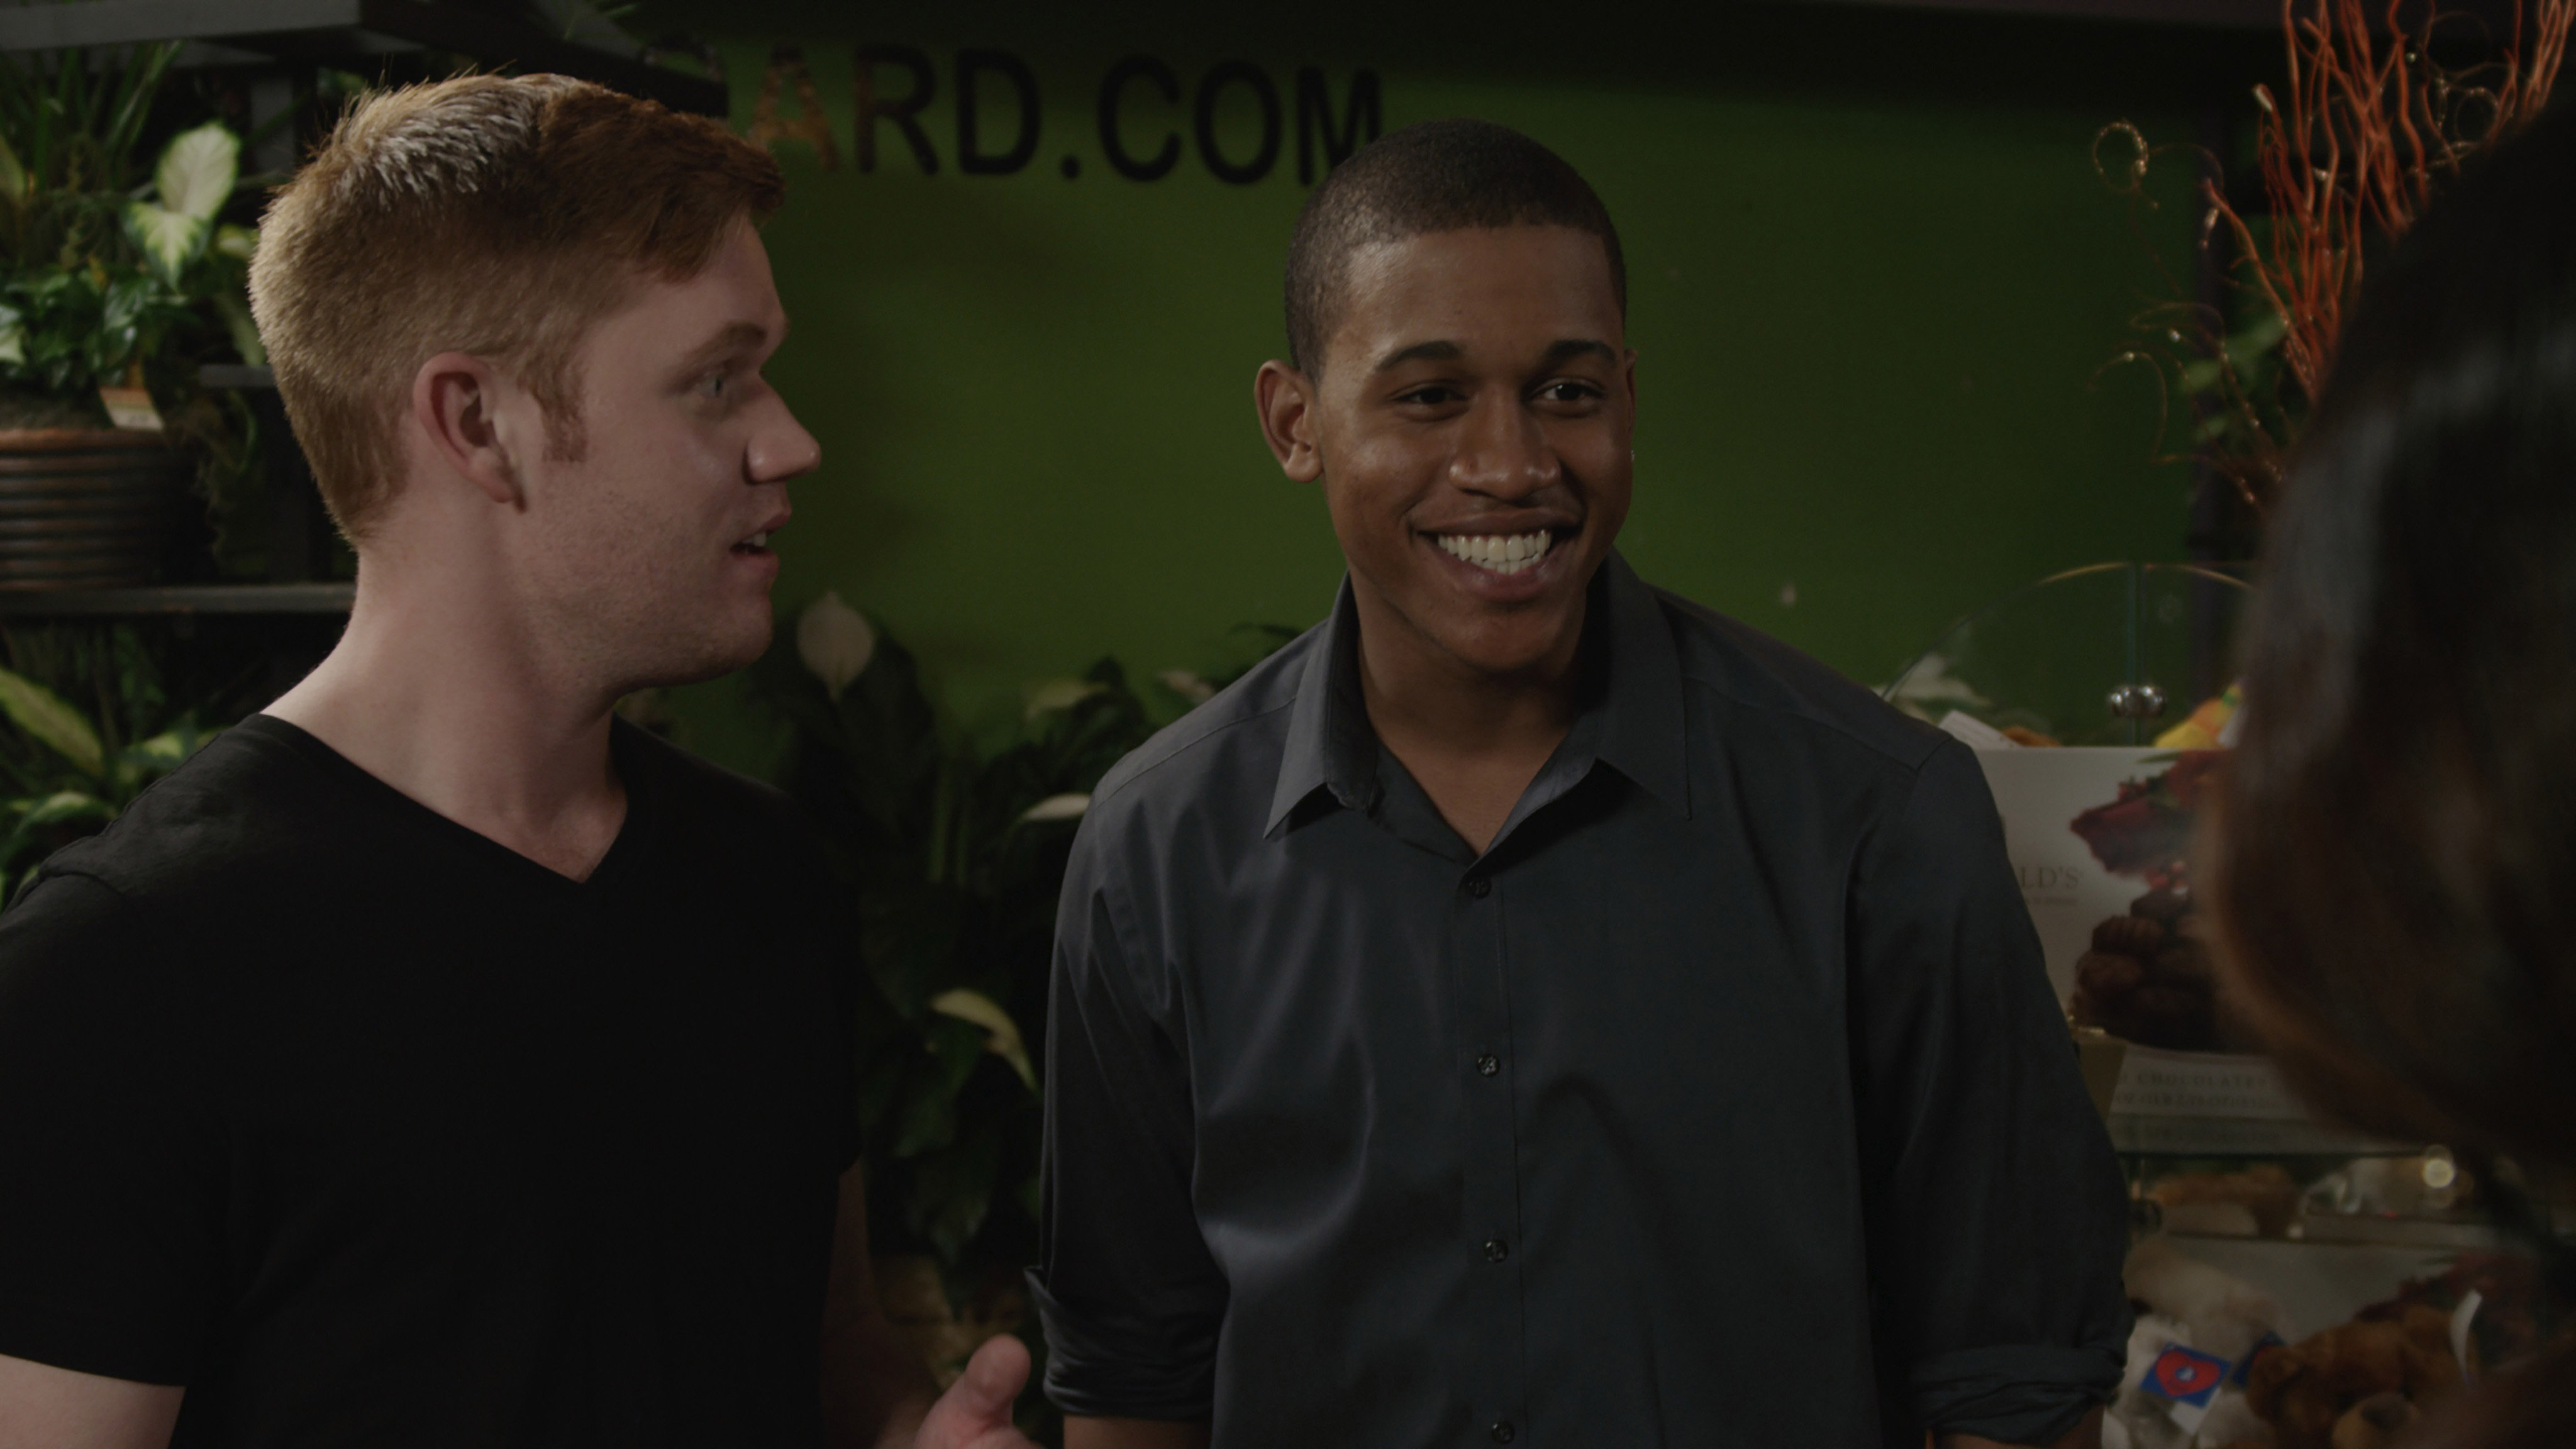 From left to right: James Poole (Paddy), Lance Lemon (Chuck). 'Chuck' facilitates an initial meeting in the flower shop scene.